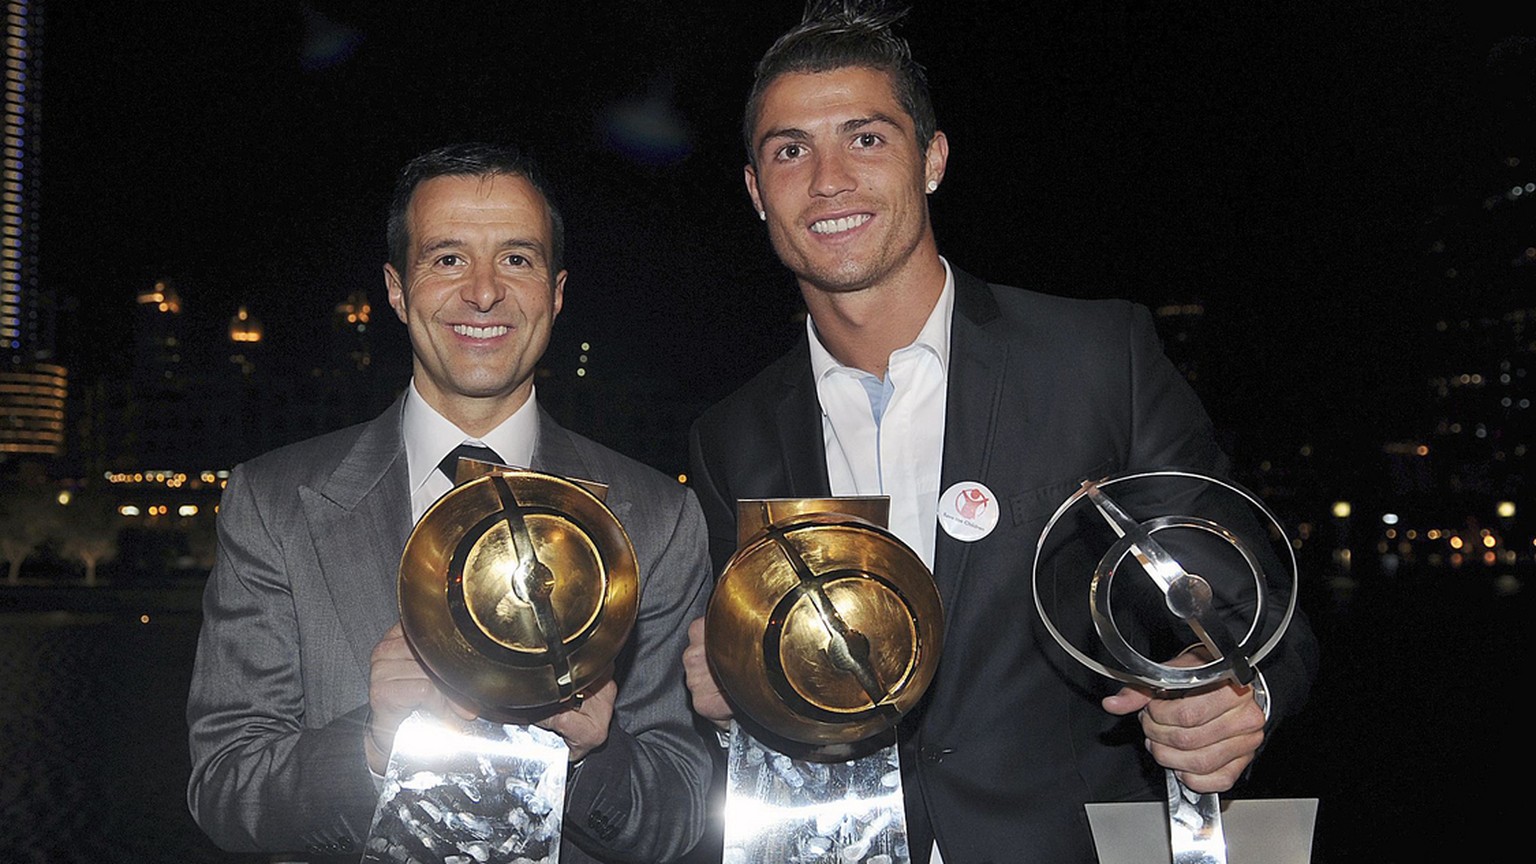 epa03044492 Real Madrid soccer player, Portuguese Cristiano Ronaldo (R), and his manager Jorge Mendes (L), pose with the trophies won during the Globe Soccer Awards ceremony held at Dubai, UAE, 28 Dec ...